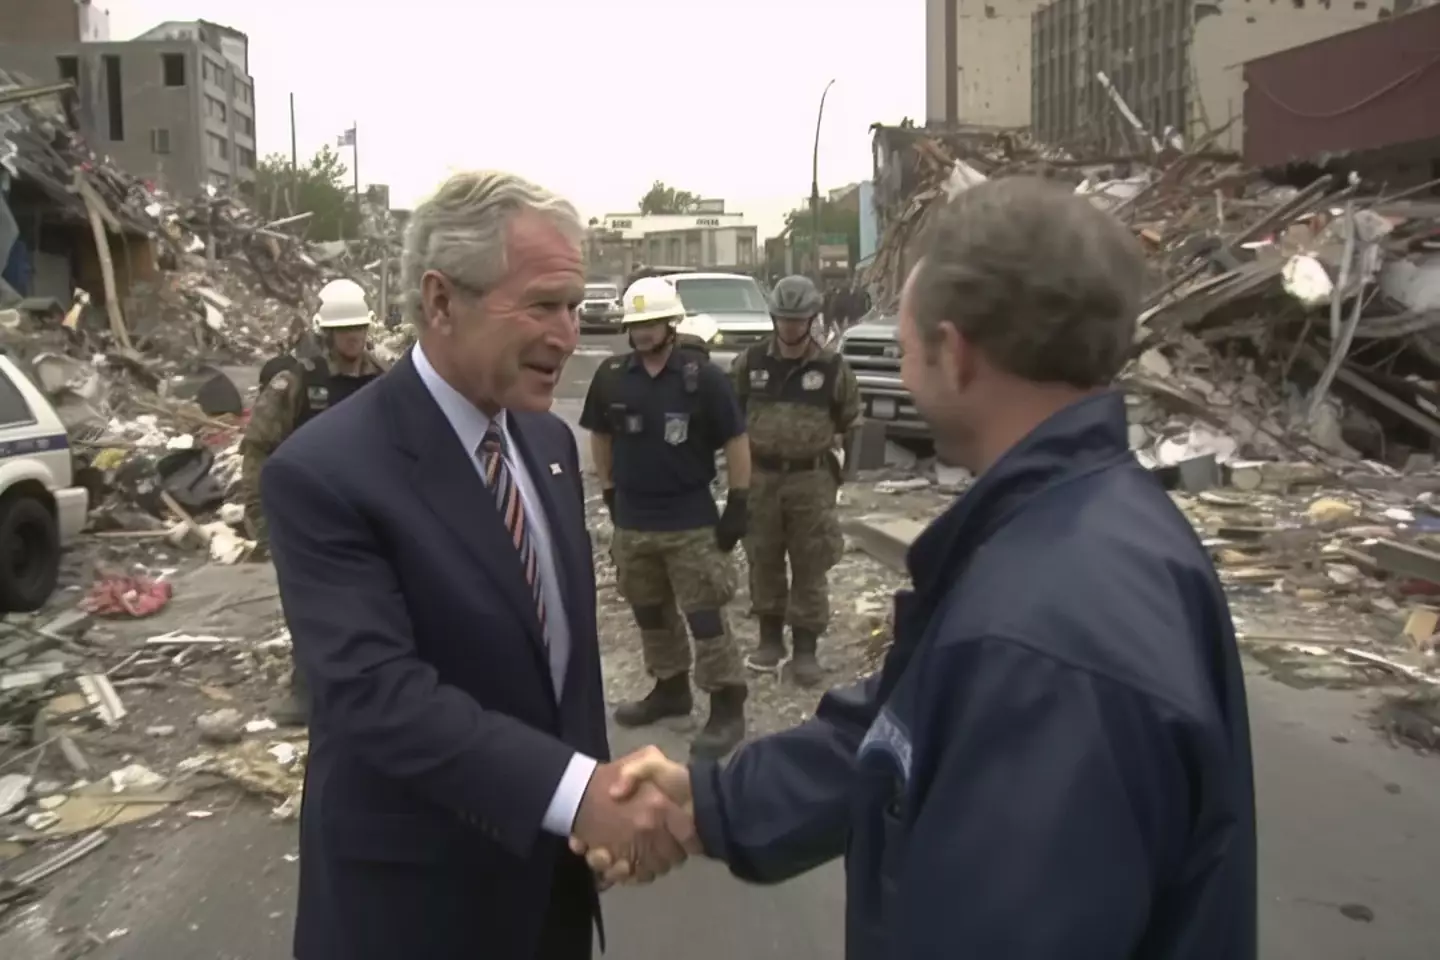 The photos included scenes of building rubble and even former-President Bush.